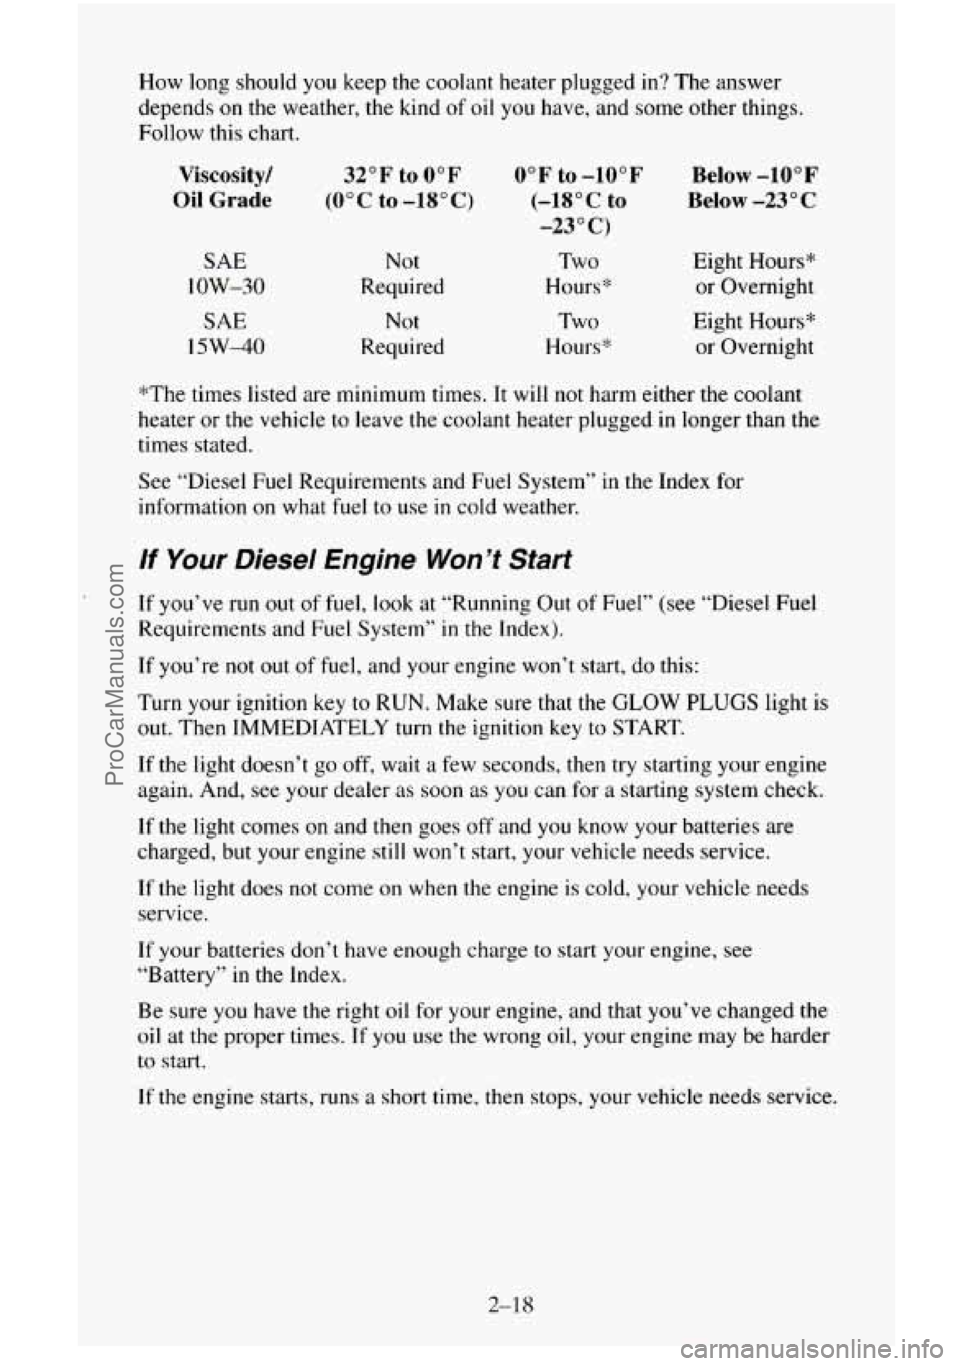 CHEVROLET SUBURBAN 1995  Owners Manual How long should  you keep the coolant  heater plugged  in?  The answer 
depends 
on the weather, the kind  of oil you have, and some  other things. 
Follow this  chart. 
Viscosity/ 
Oil  Grade 
SAE 
l